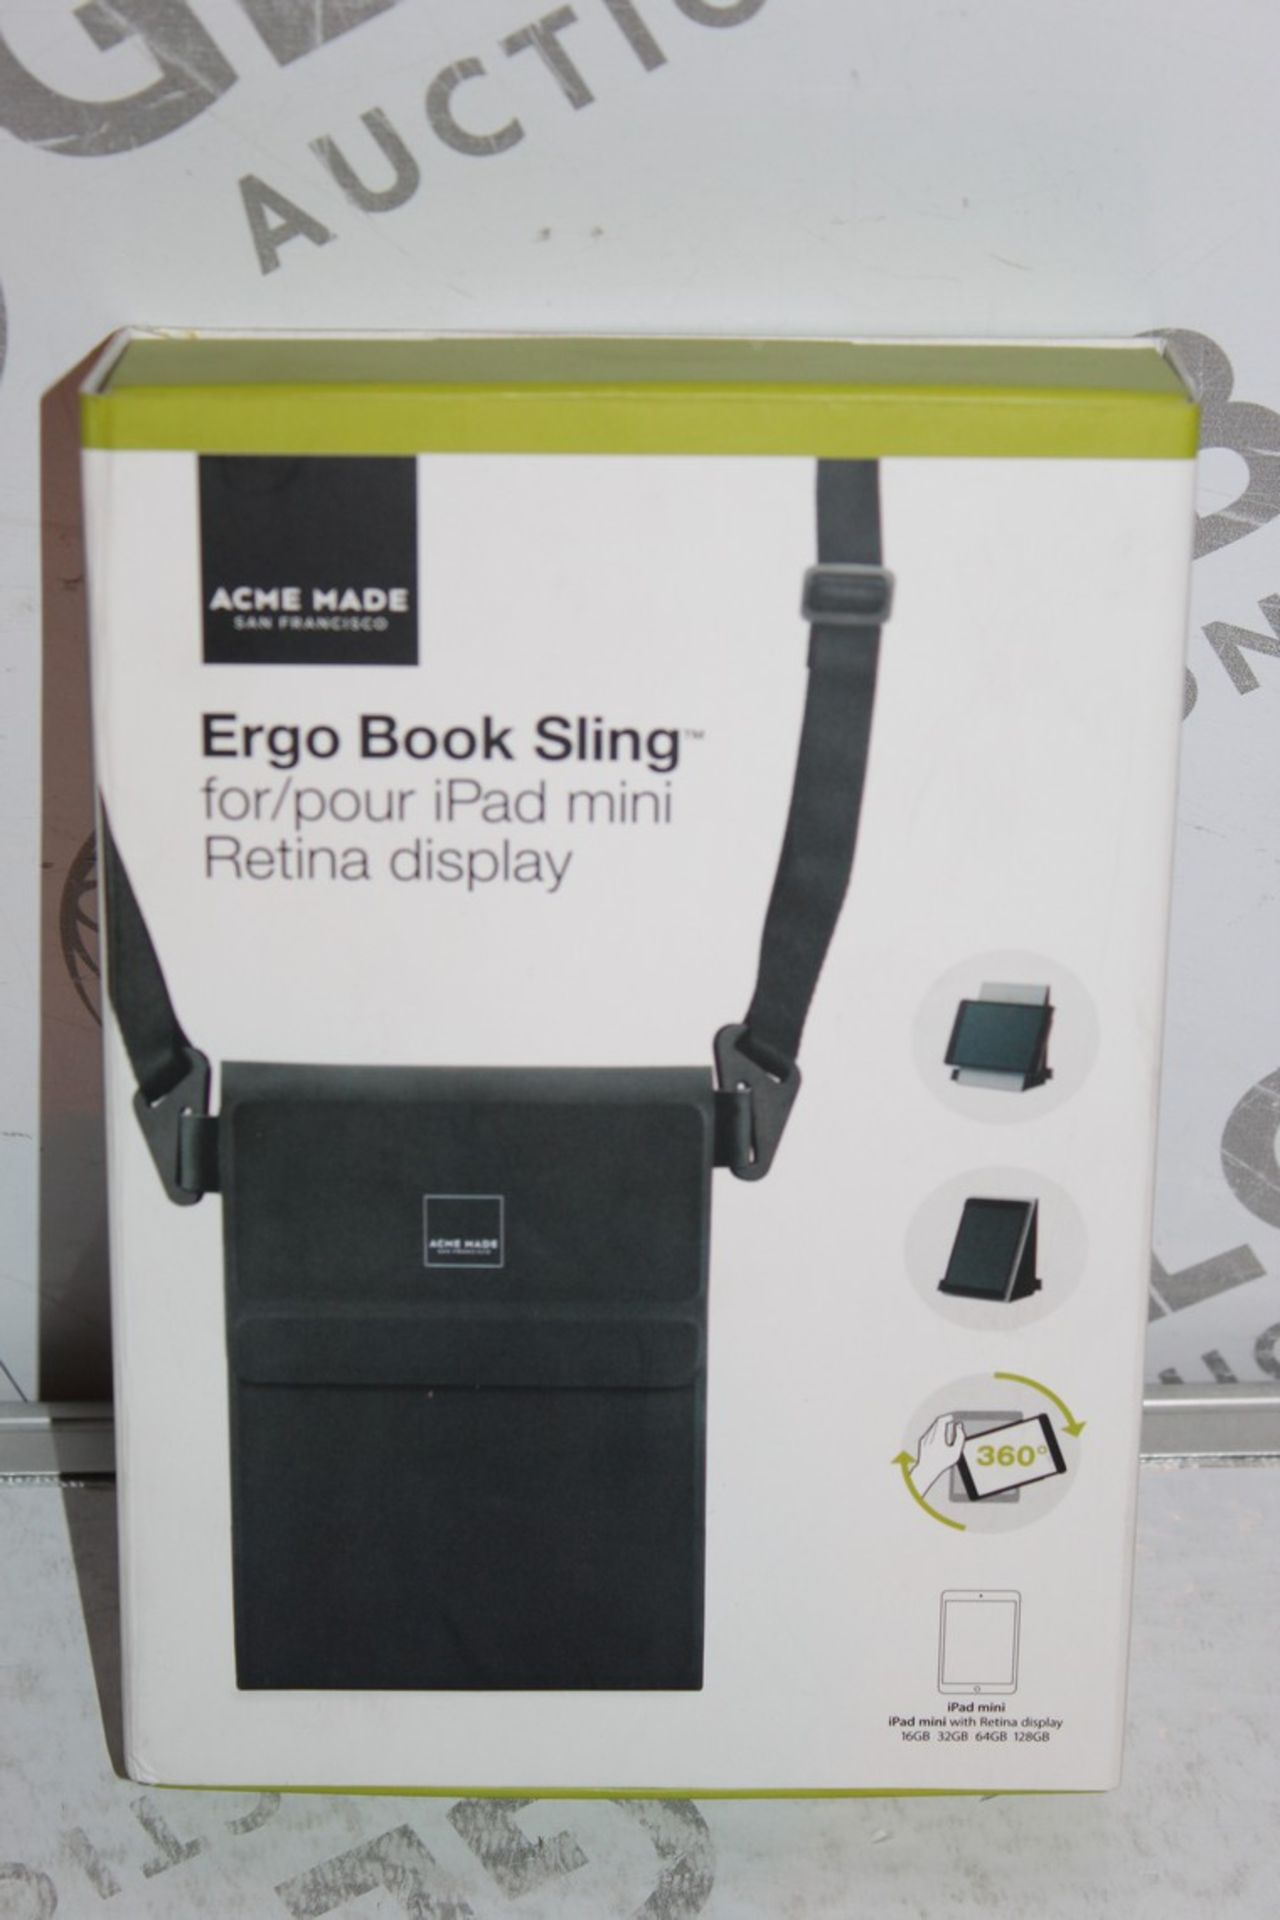 Lot to Contain 16 Boxed Brand New Acme Made Book Slings With Retina Display for Ipad Mini Combined R